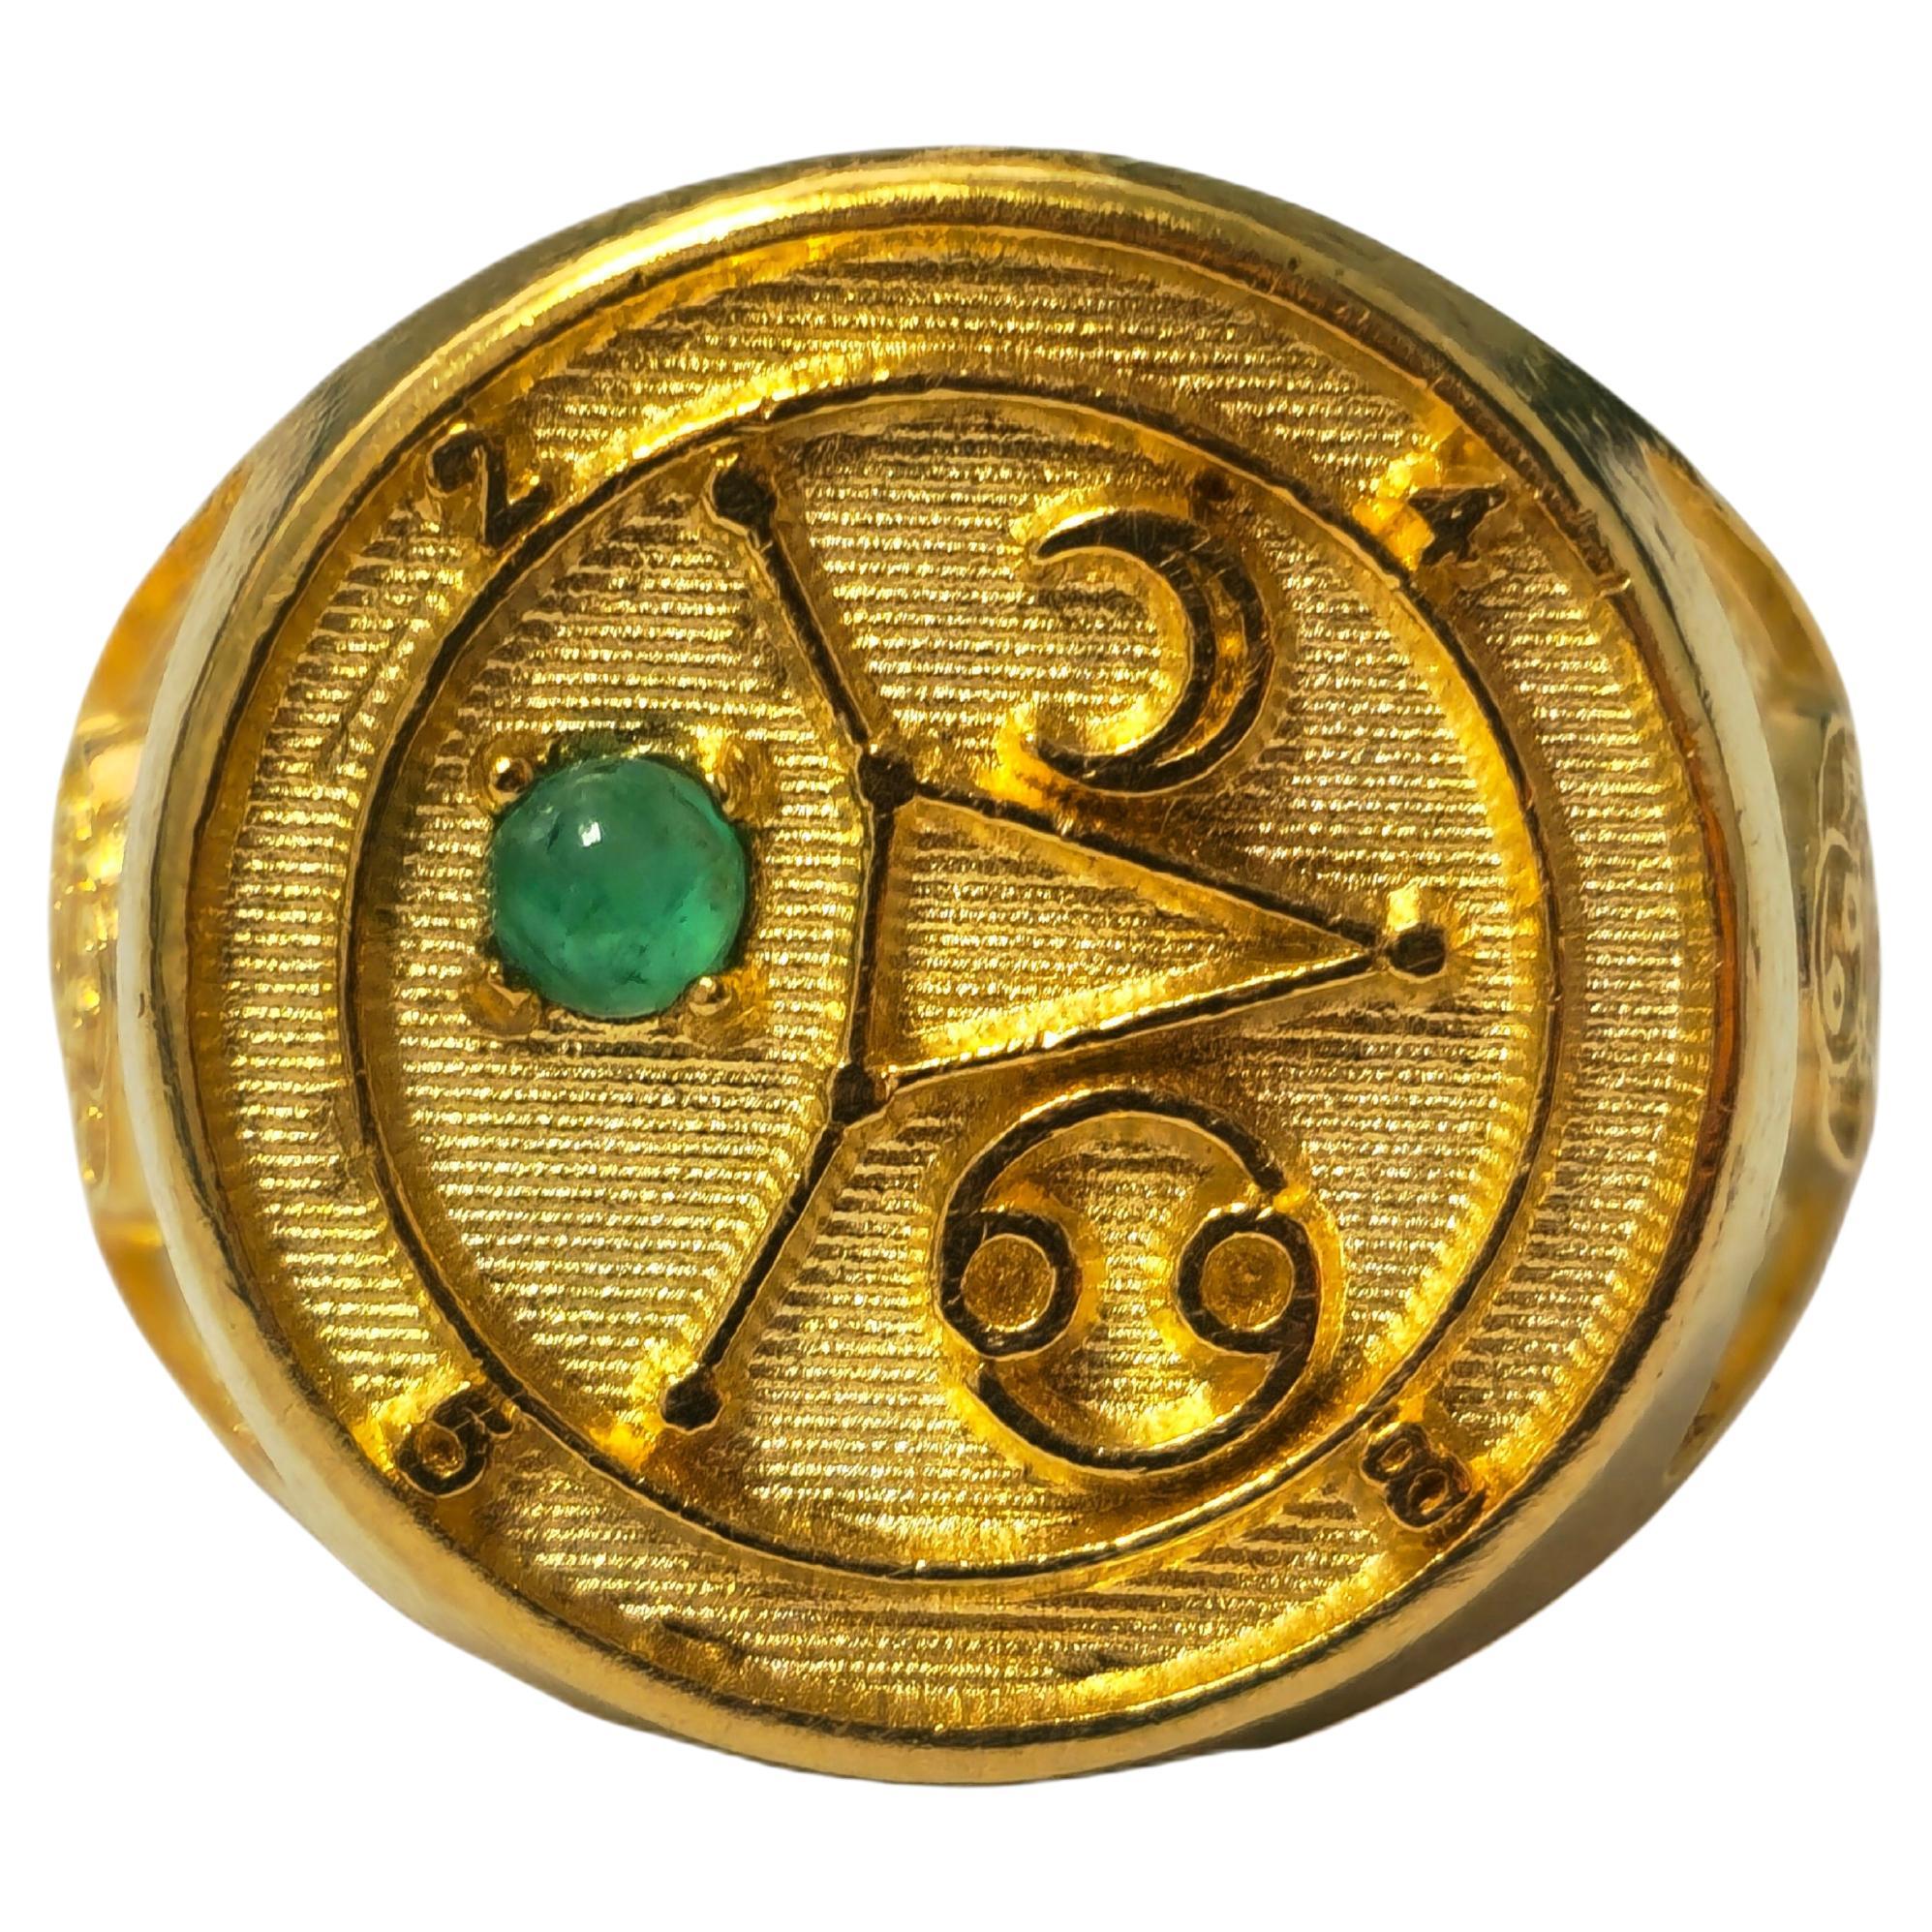 Late 20th Century Astrology Motif Emerald Ring 14k Gold 